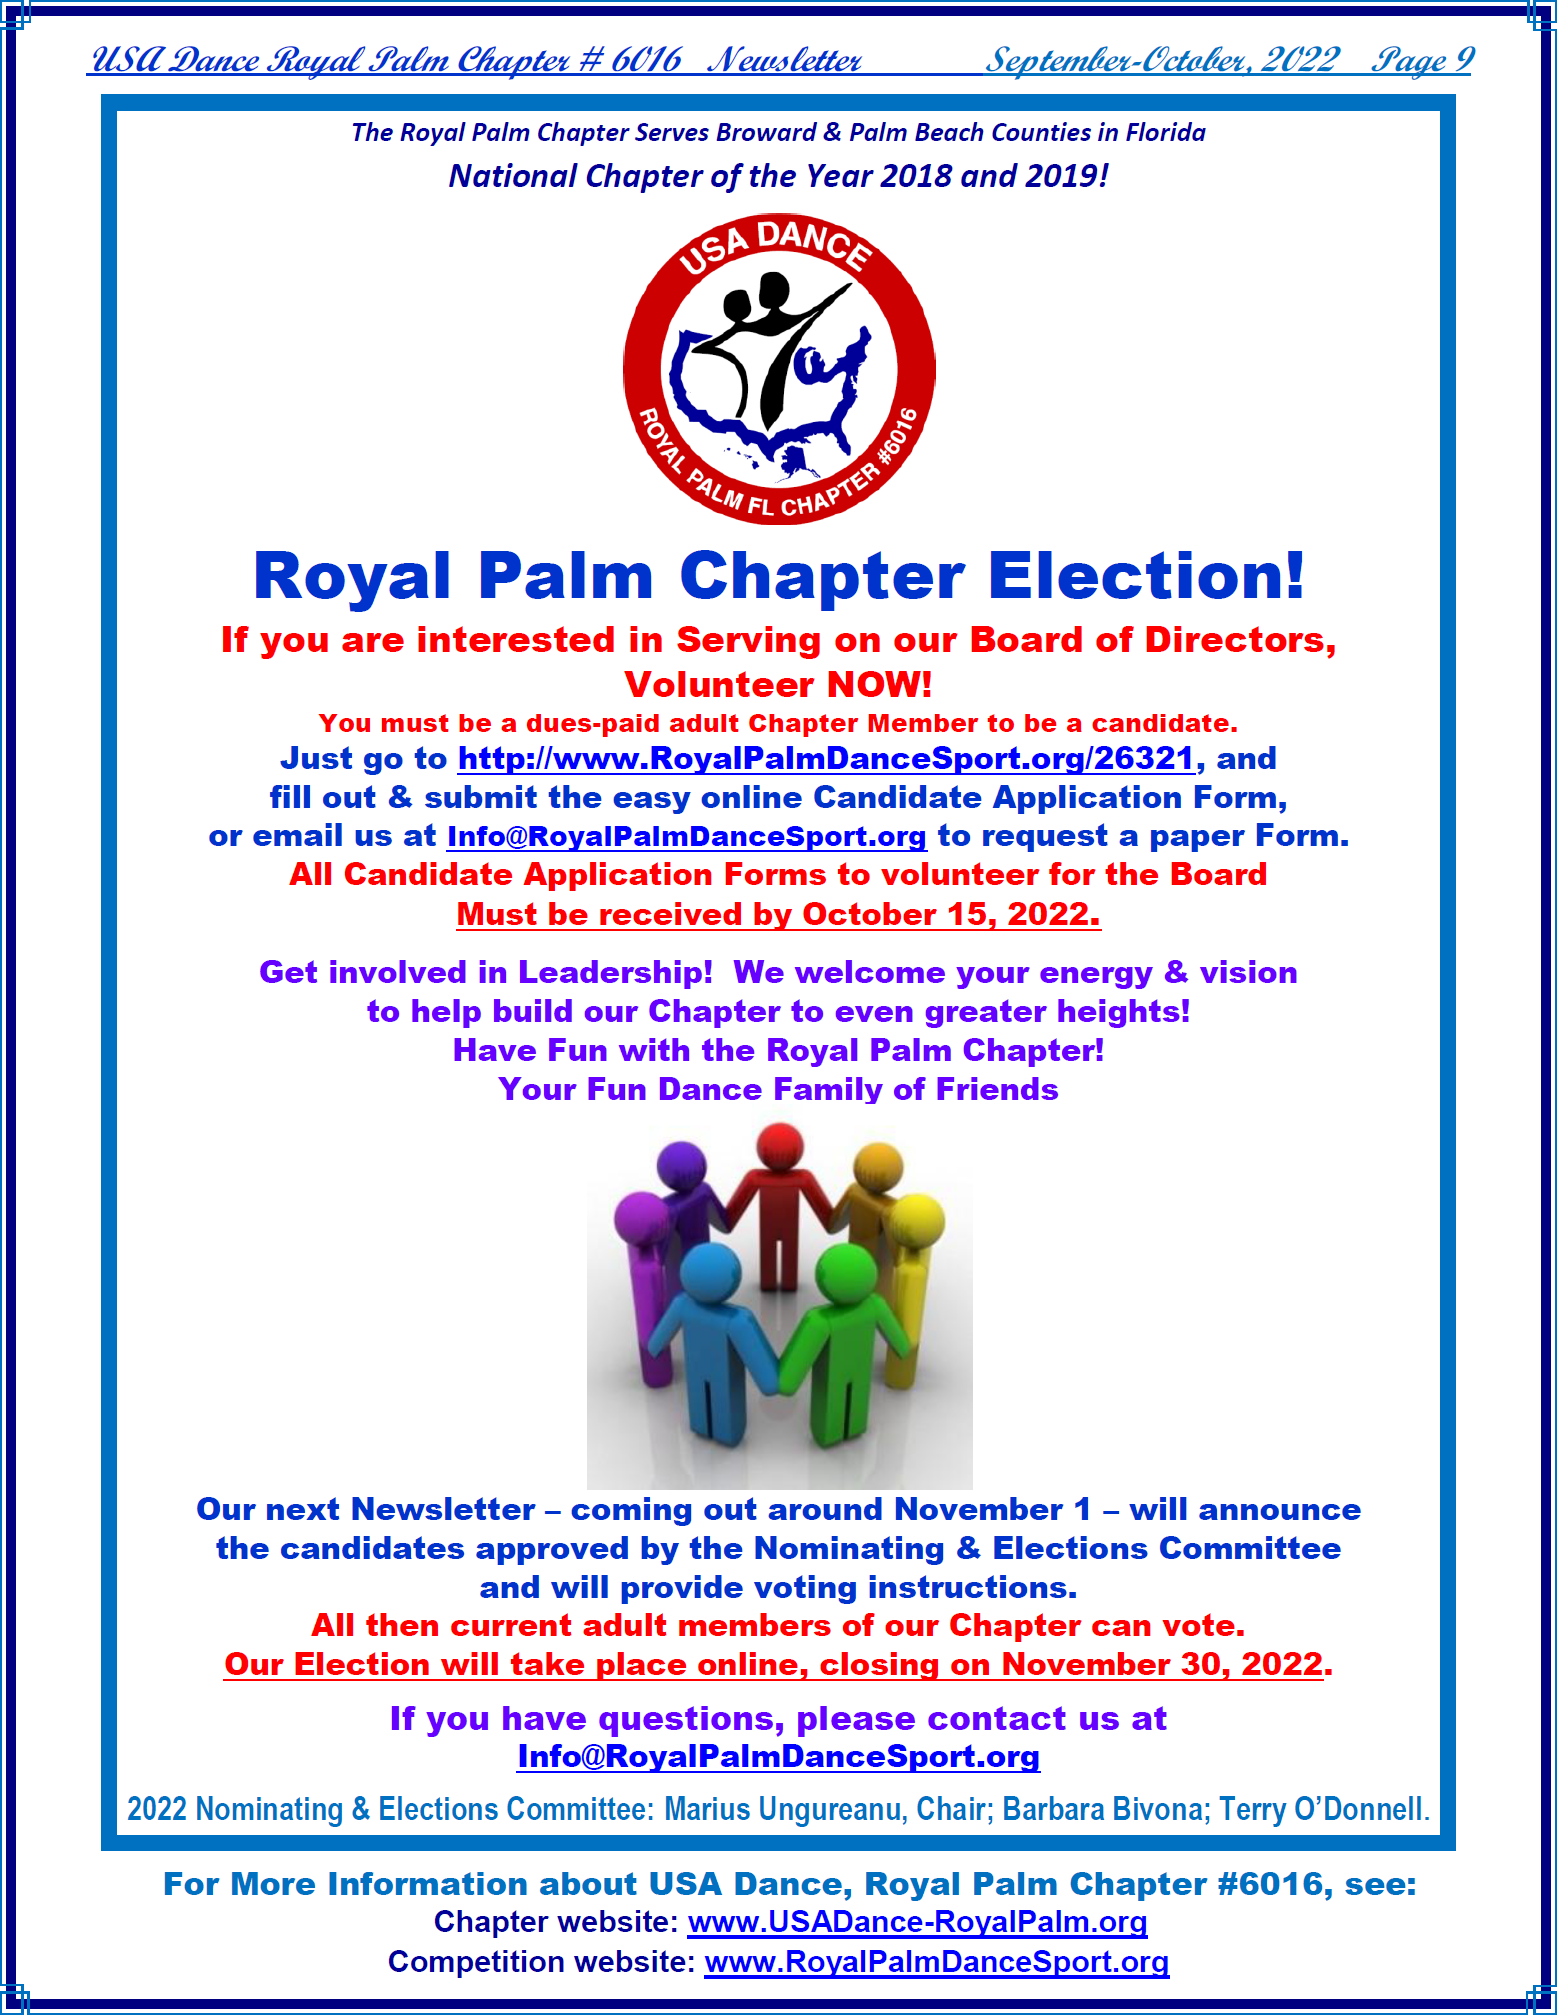 7 - Notice - Board Election - Volunteer for the Board Now!